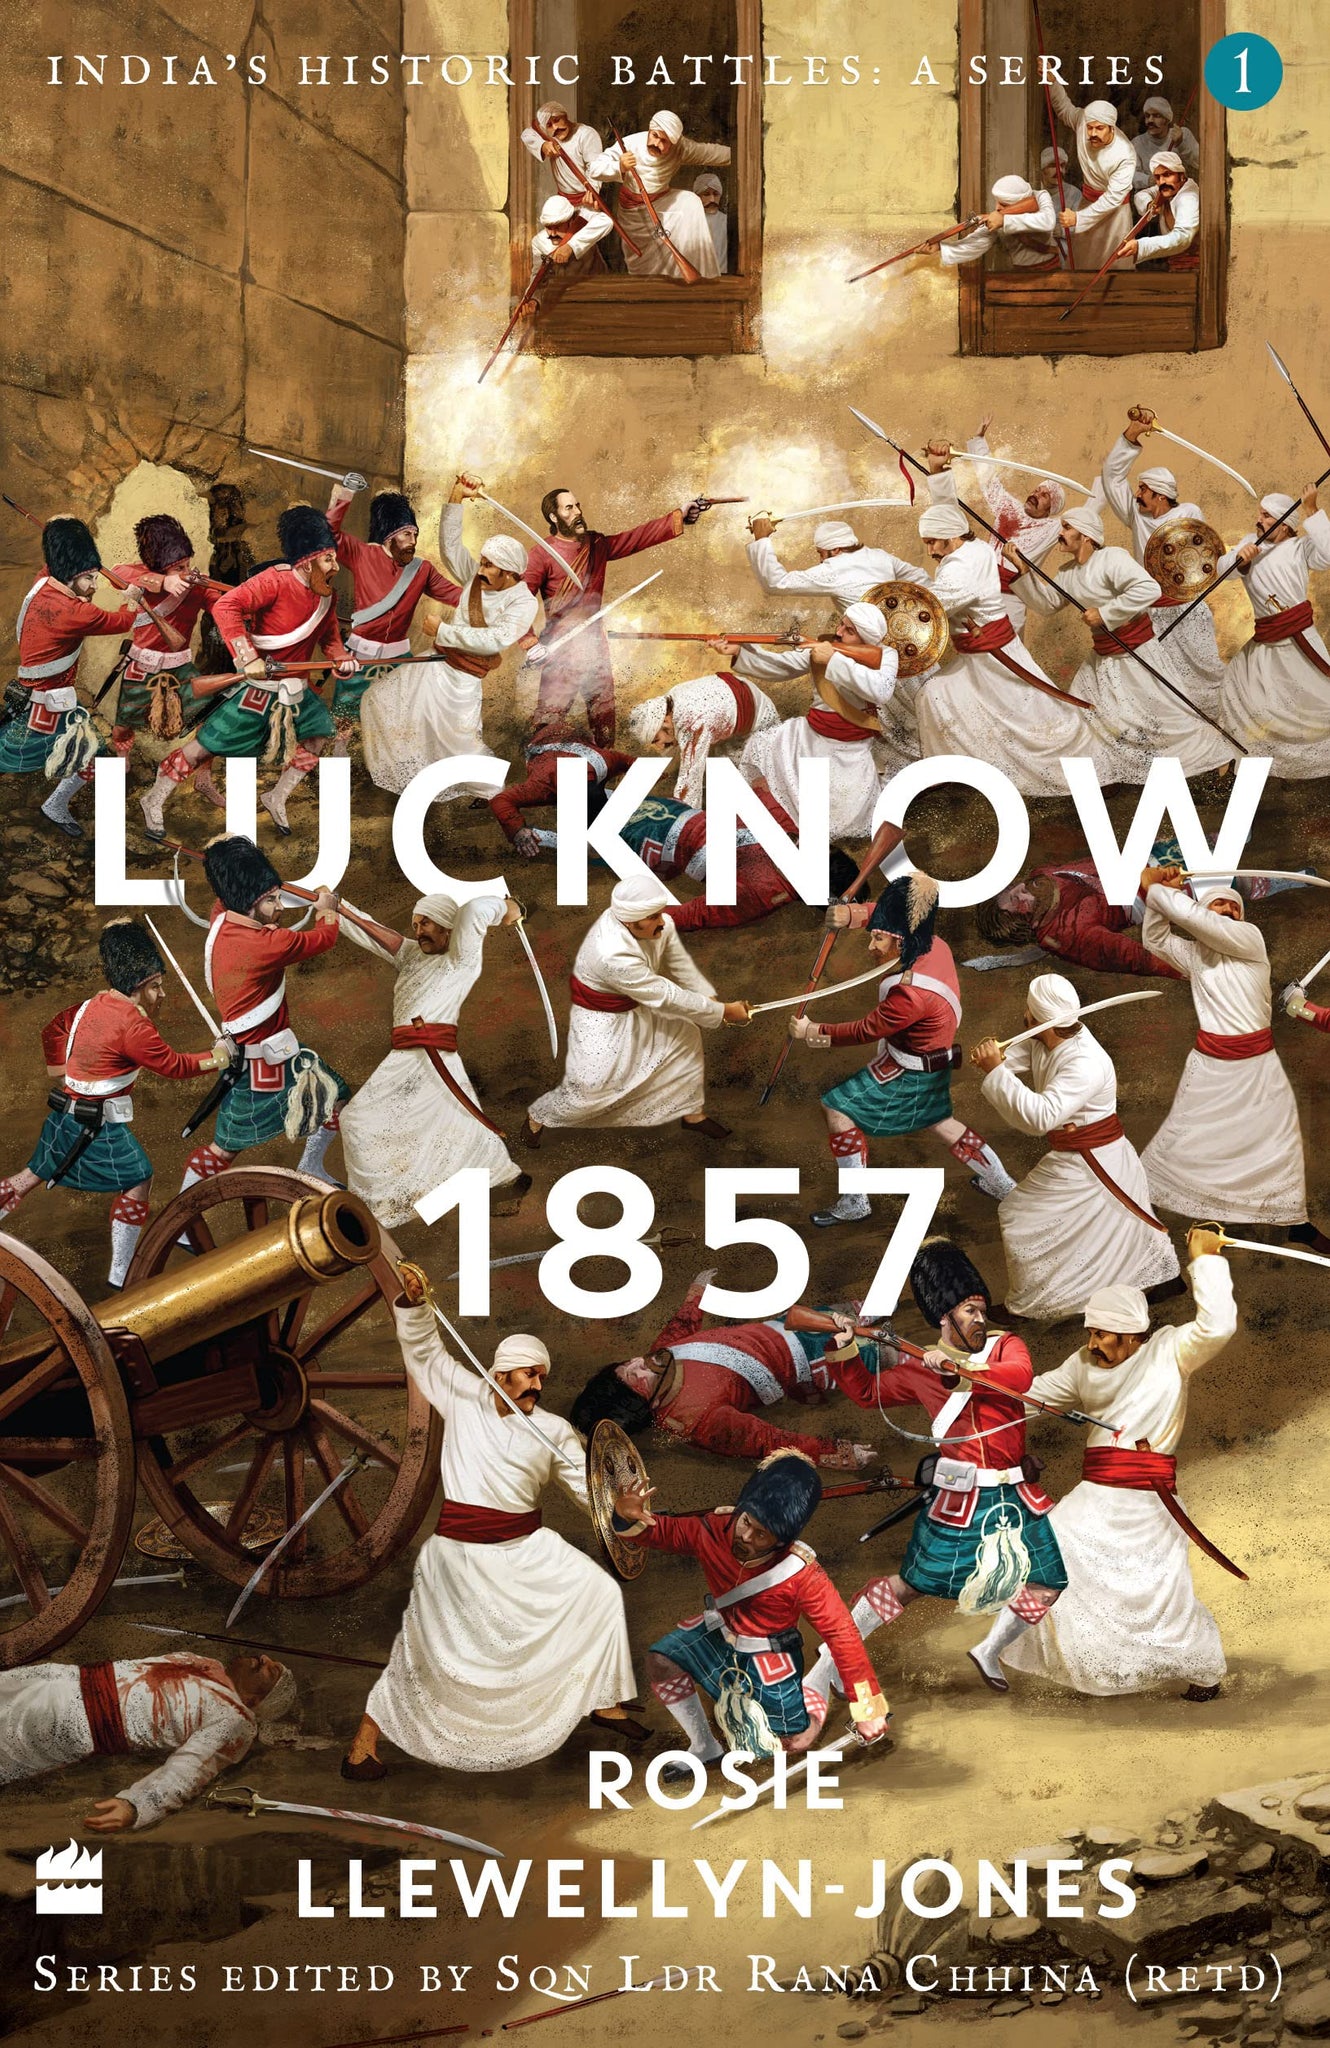 India's Historic Battles: Lucknow, 1857 (India's Historic Battles: A Series) - Paperback